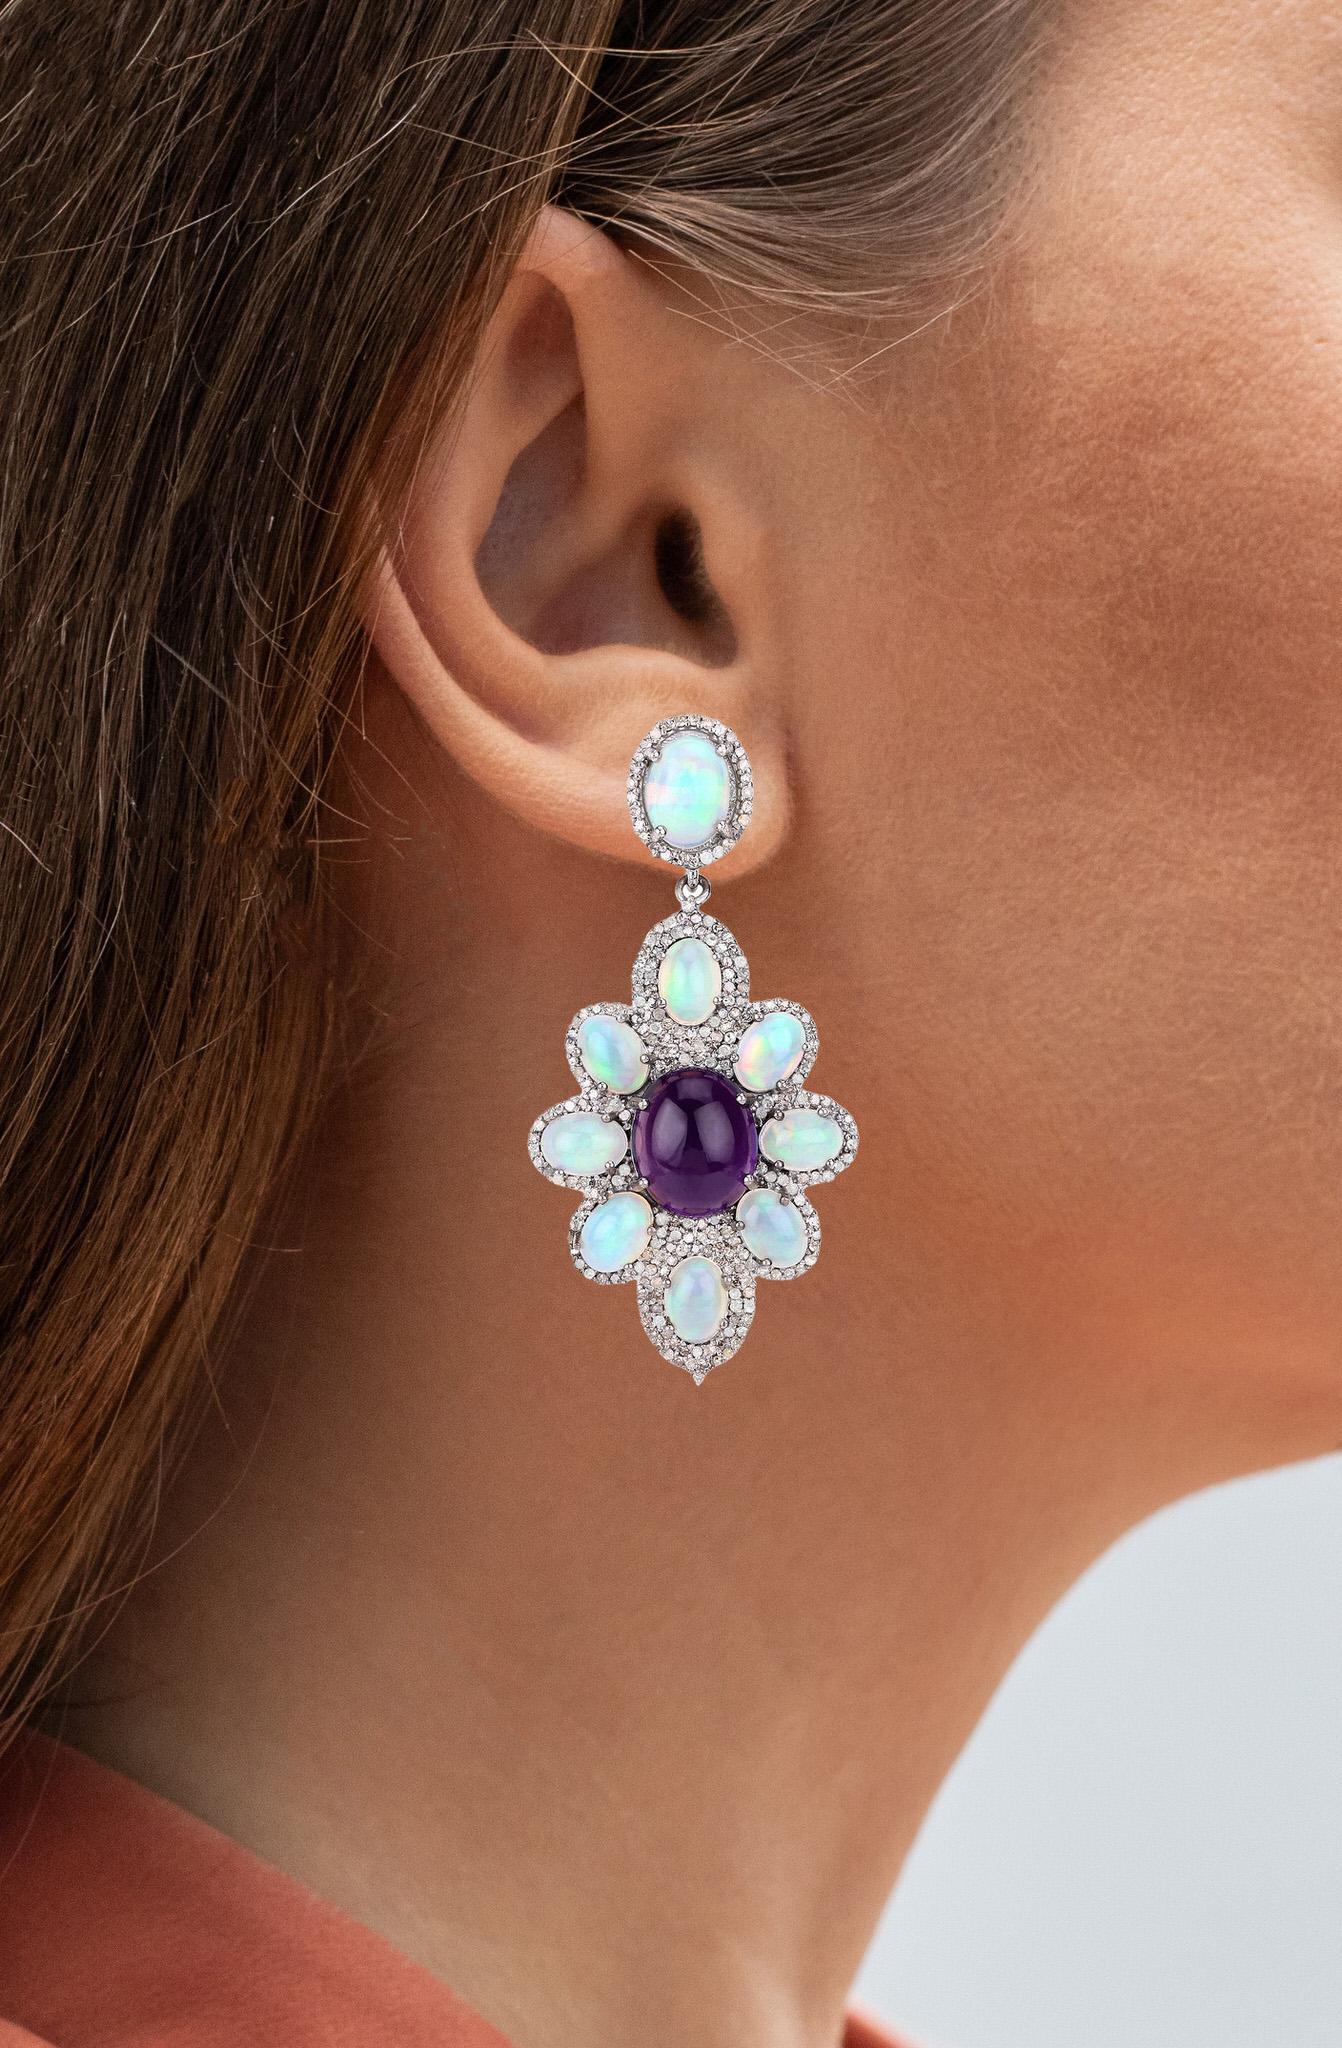 It comes with the appraisal by GIA GG/AJP
All Gemstones are Natural 
2 Amethysts = 12 Carats
18 Opals = 11.20 Carats
478 Diamonds = 2.30 Carats
Metal: Sterling Silver
Post With Friction Back
Length: 54 mm